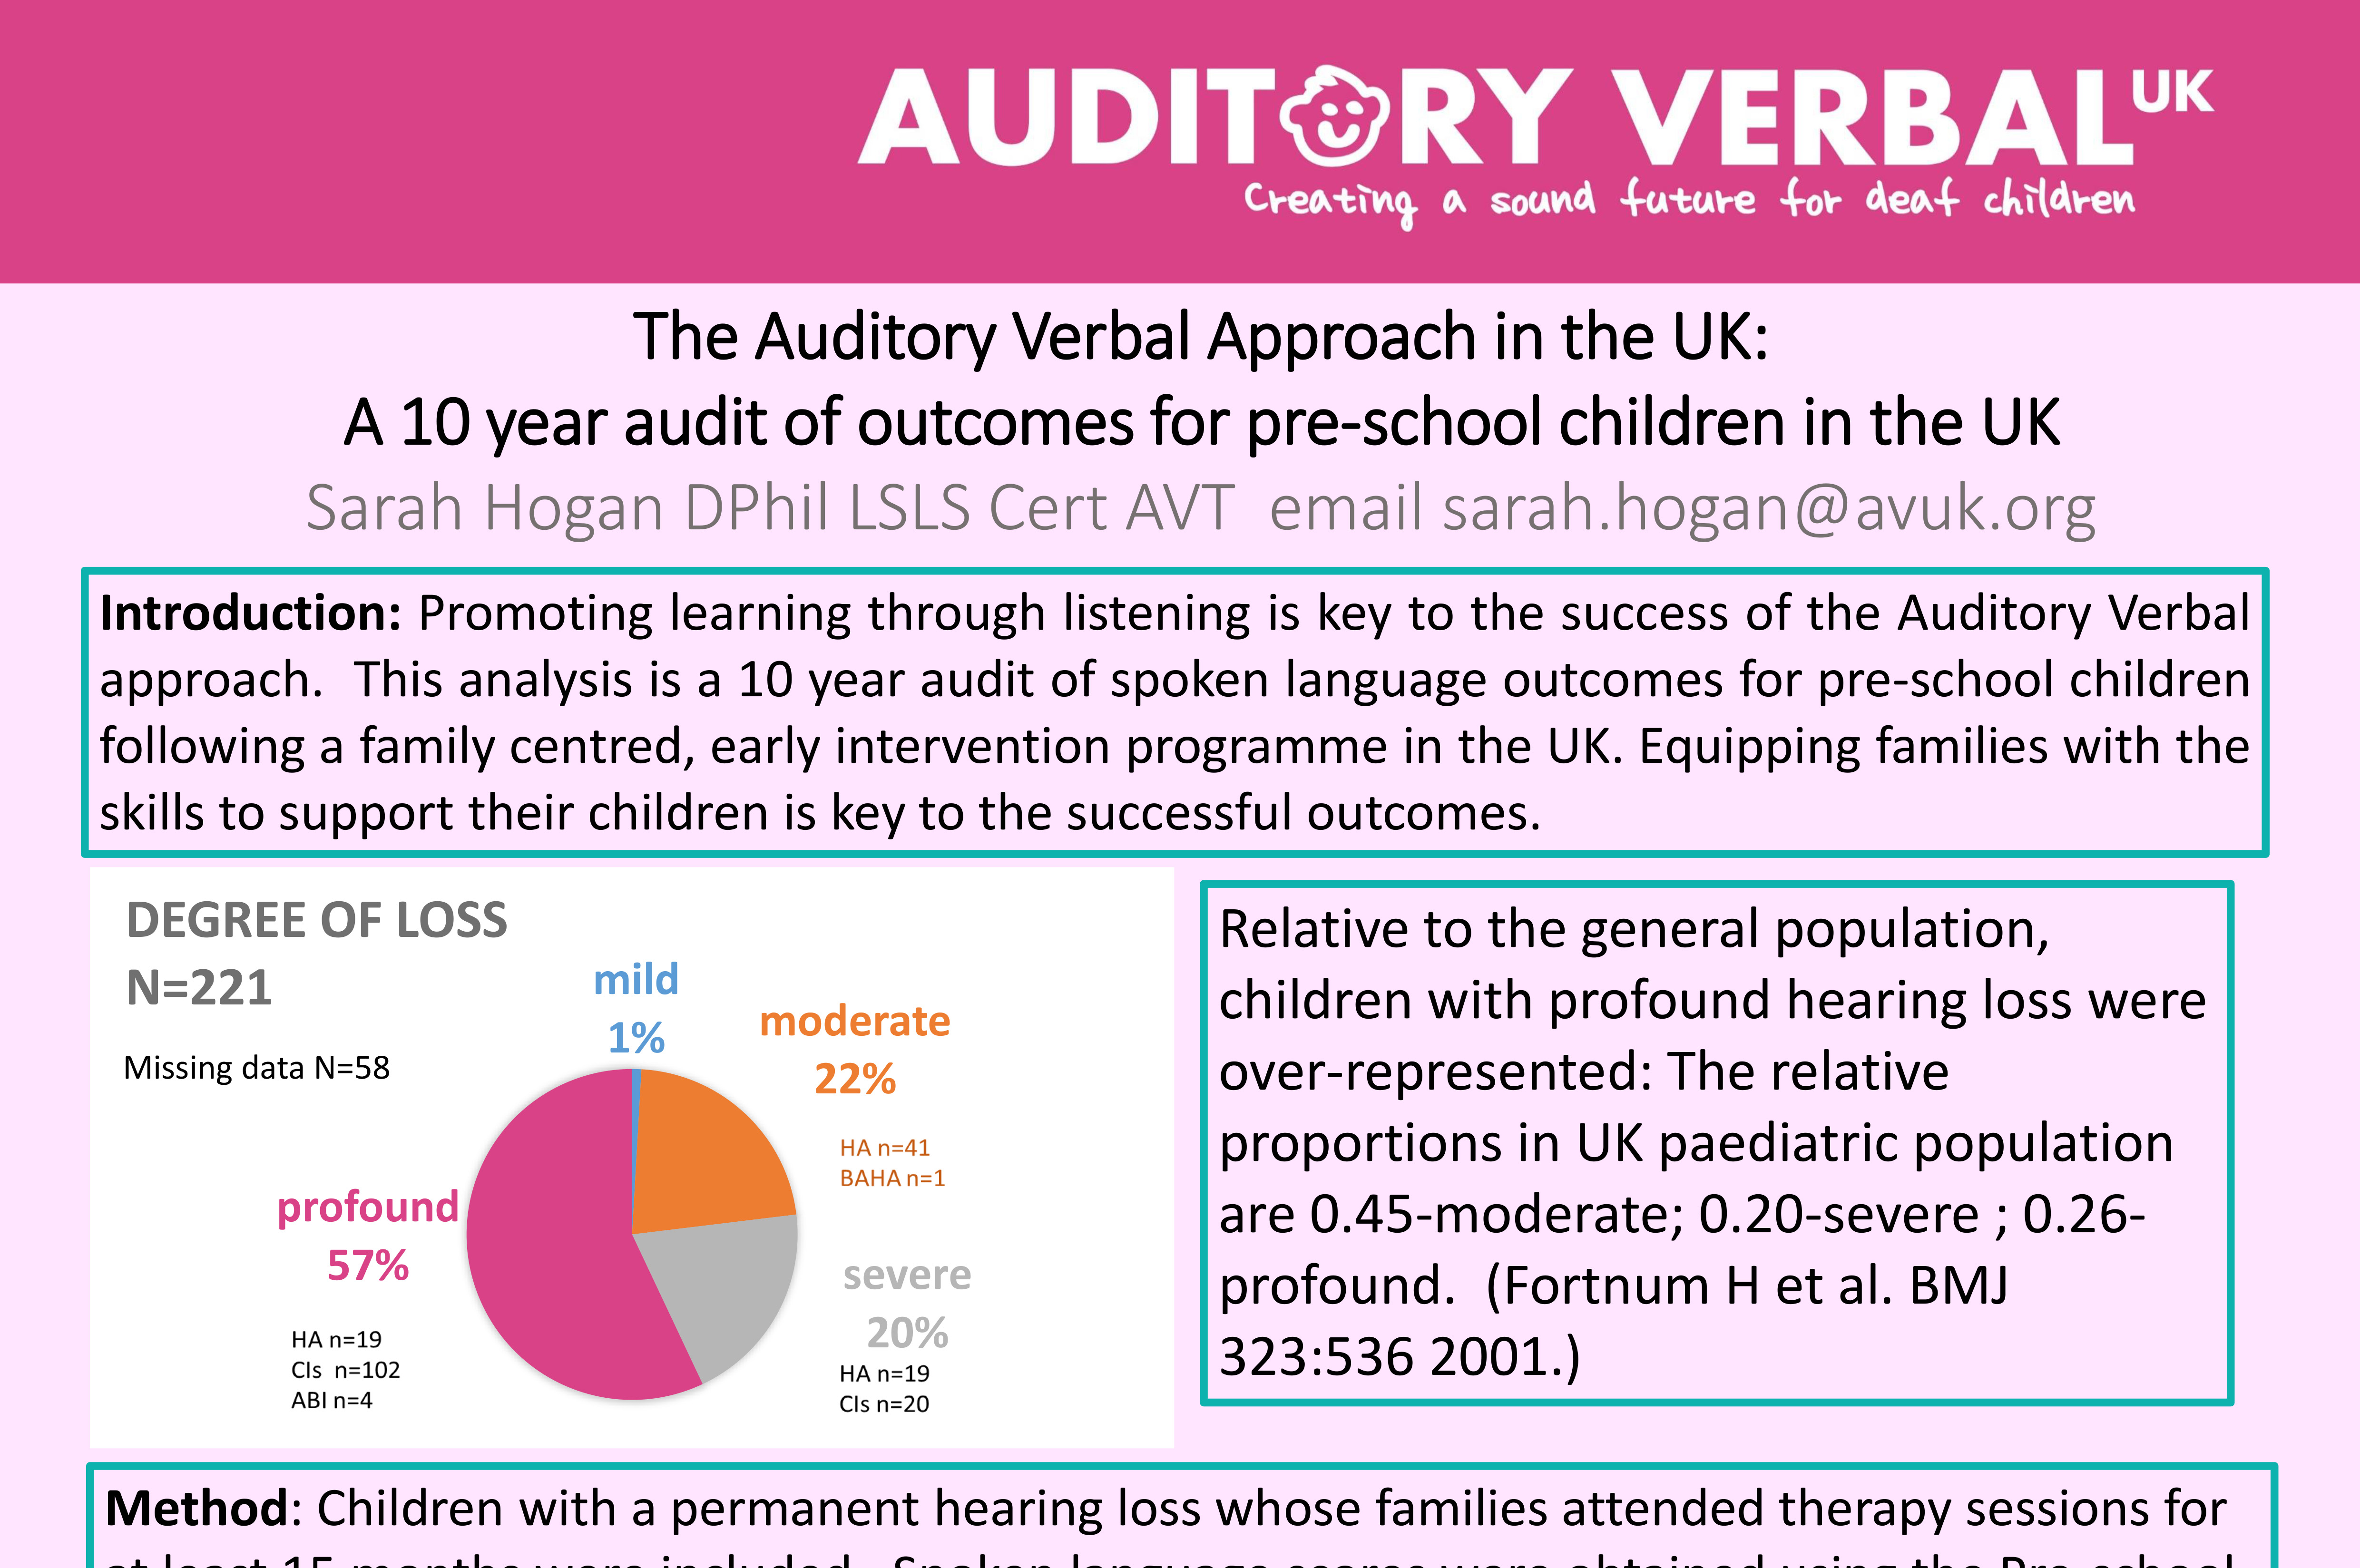 The auditory verbal approach in the UK